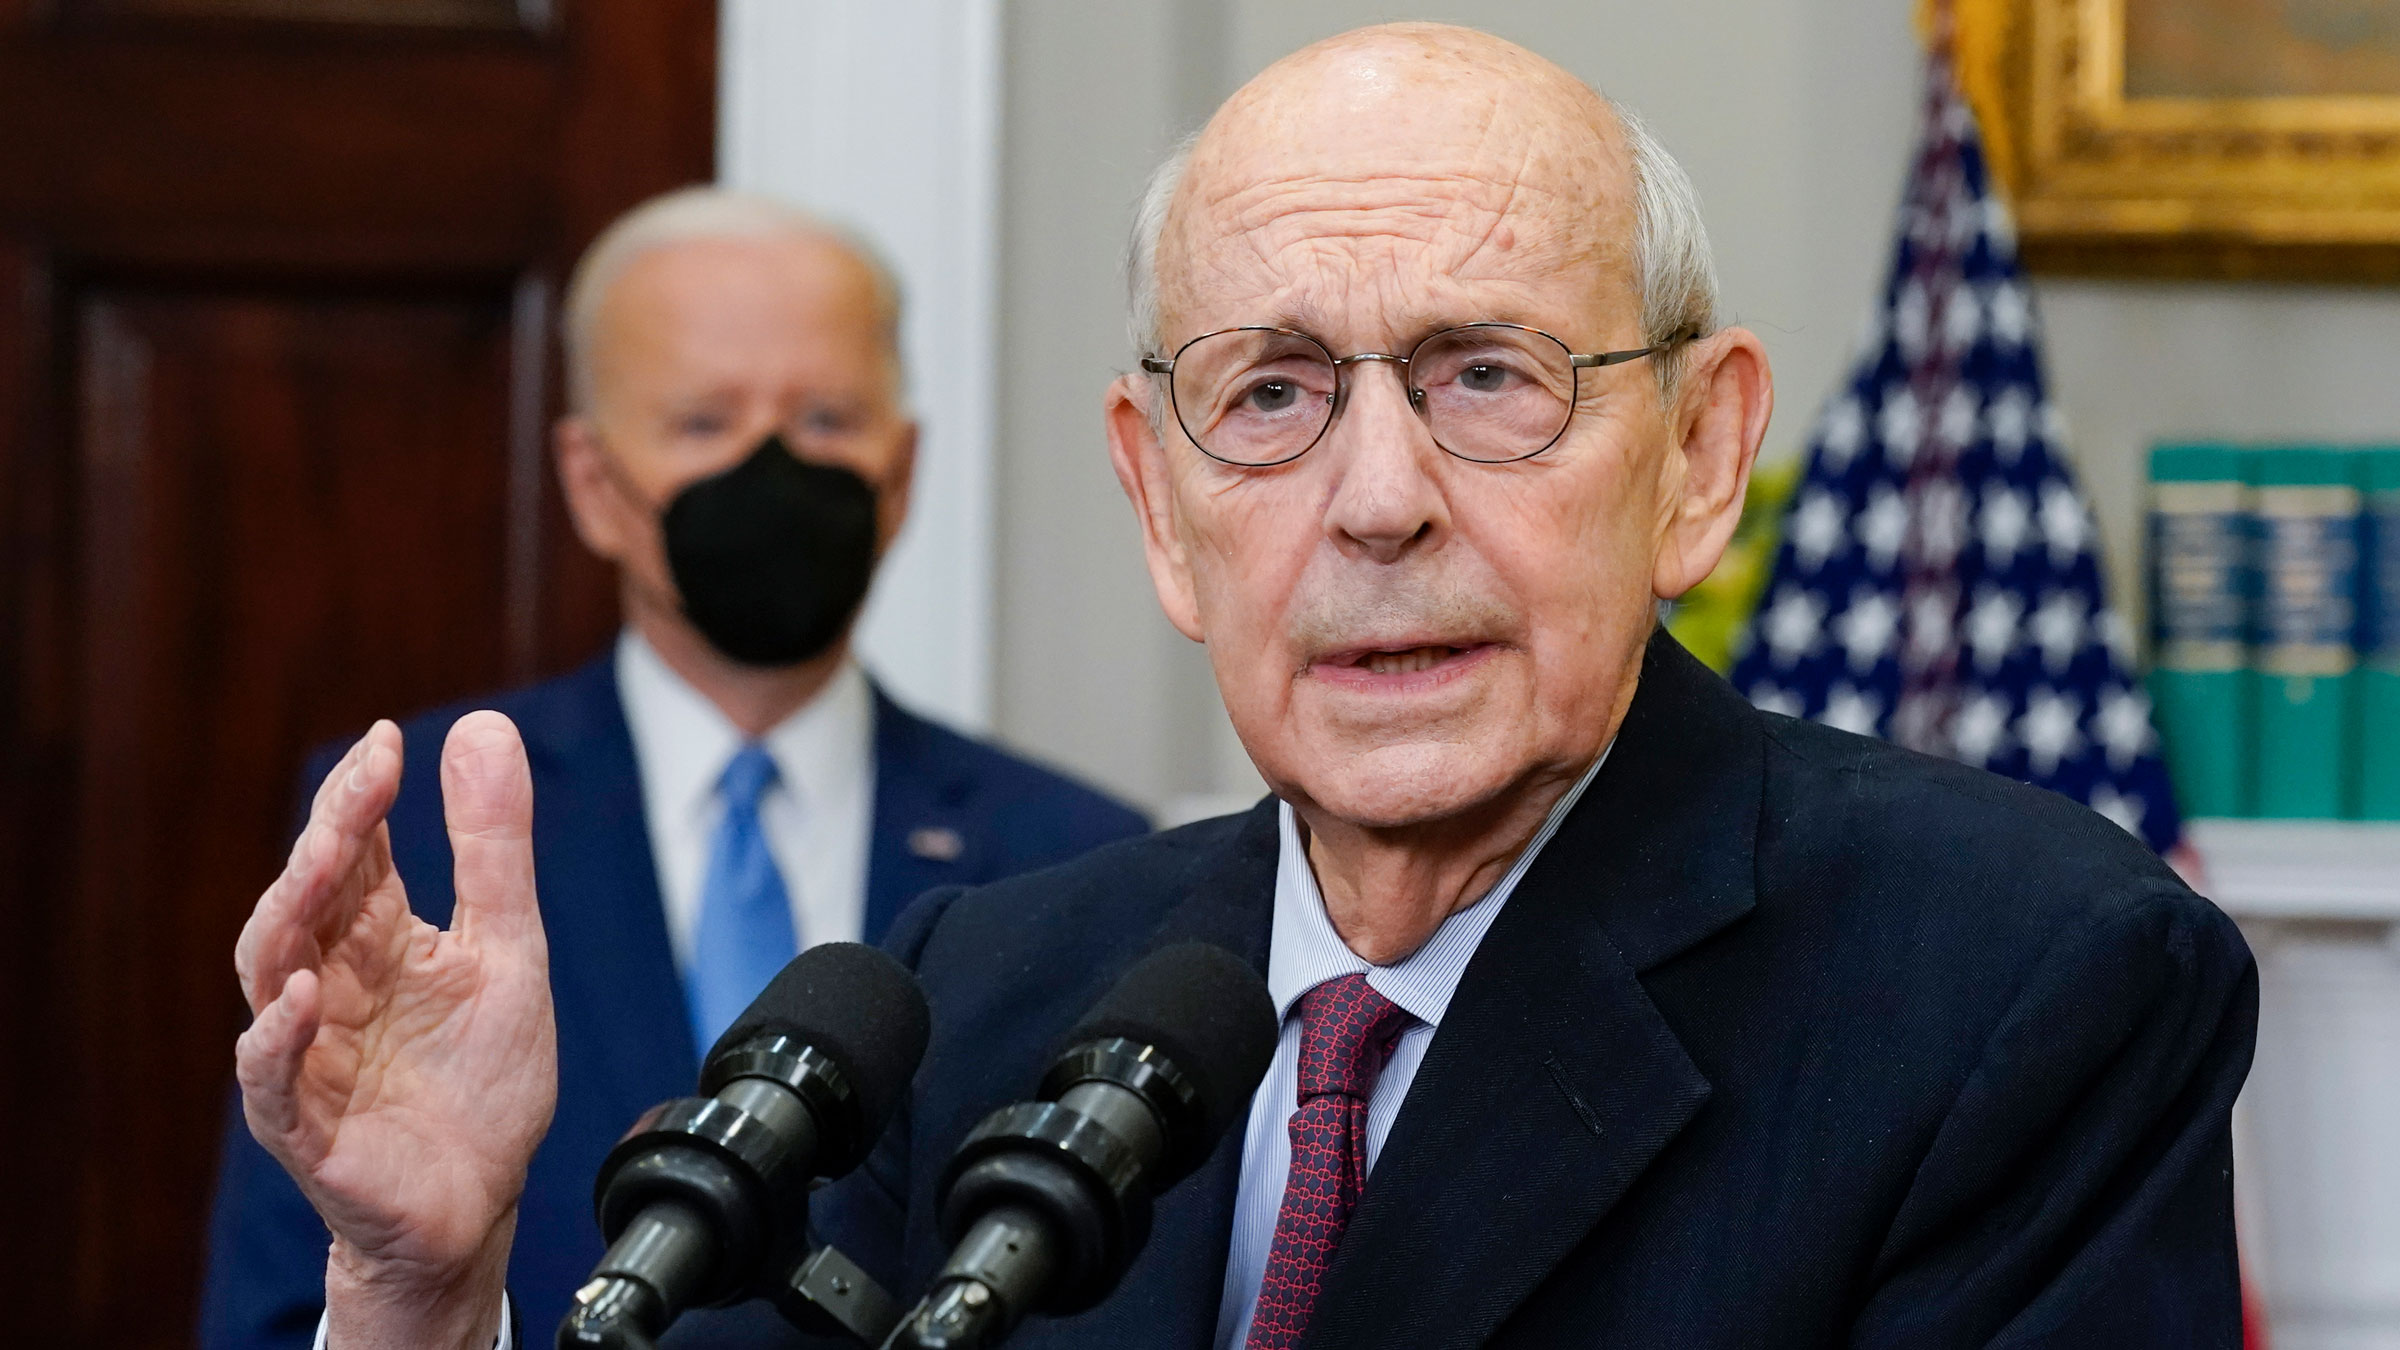 Supreme Court Justice Stephen Breyer announces his retirement at the White House in January.